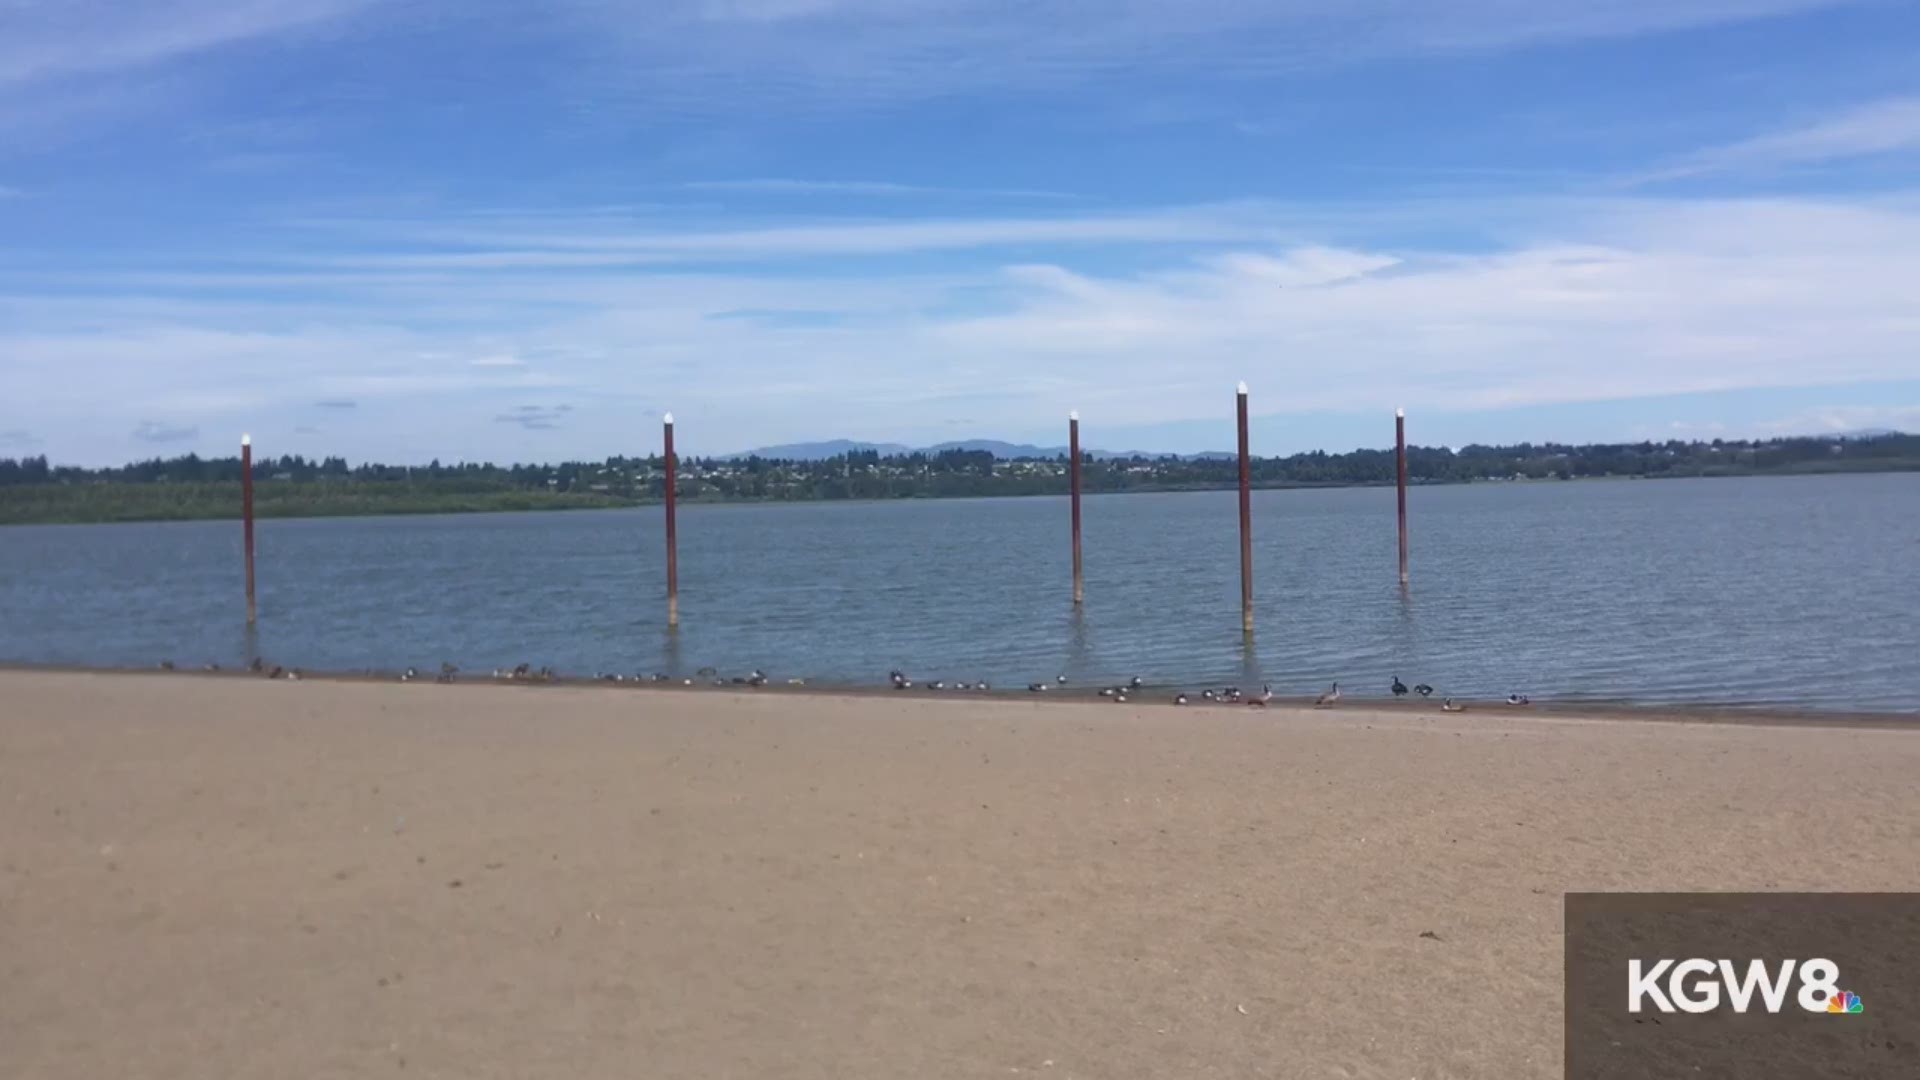 Health officials say people should not go in the water at Vancouver Lake.